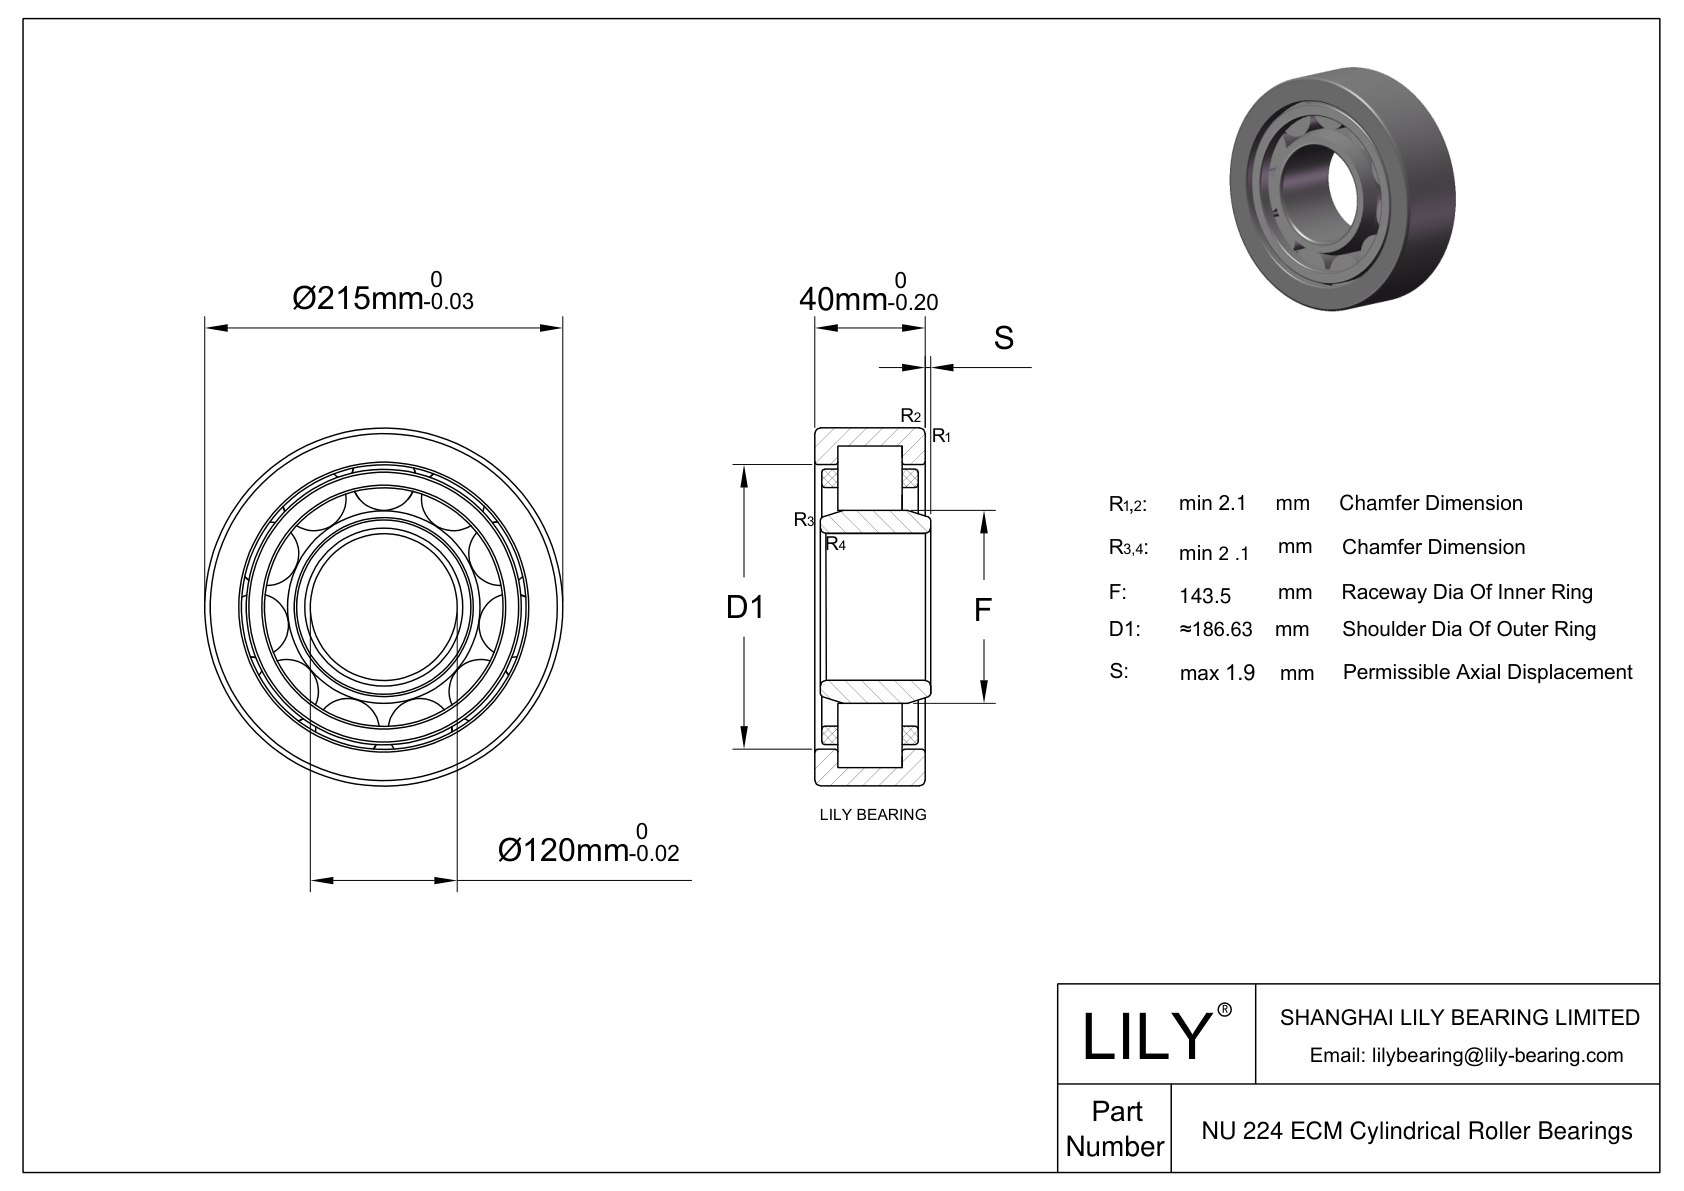 NU 224 ECM/C3VL0241 Ceramic Coated Cylindrical Roller Bearings cad drawing